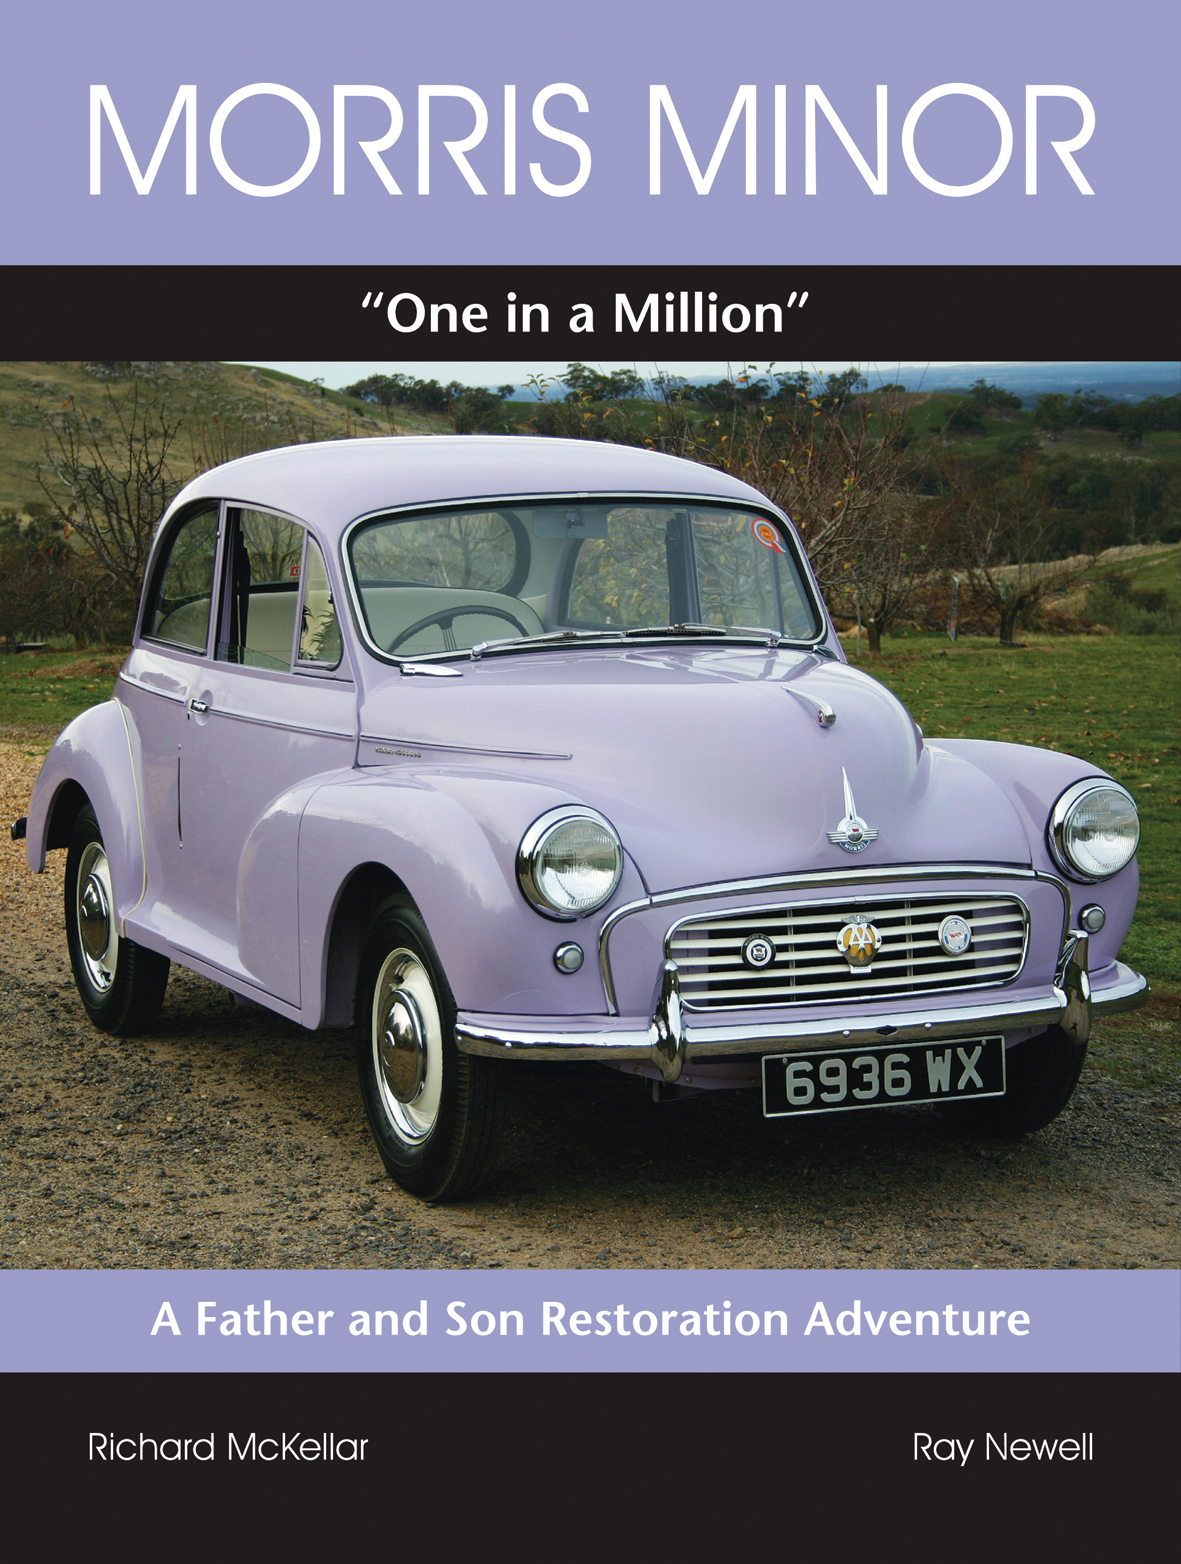 Morris Minor - One in a Million